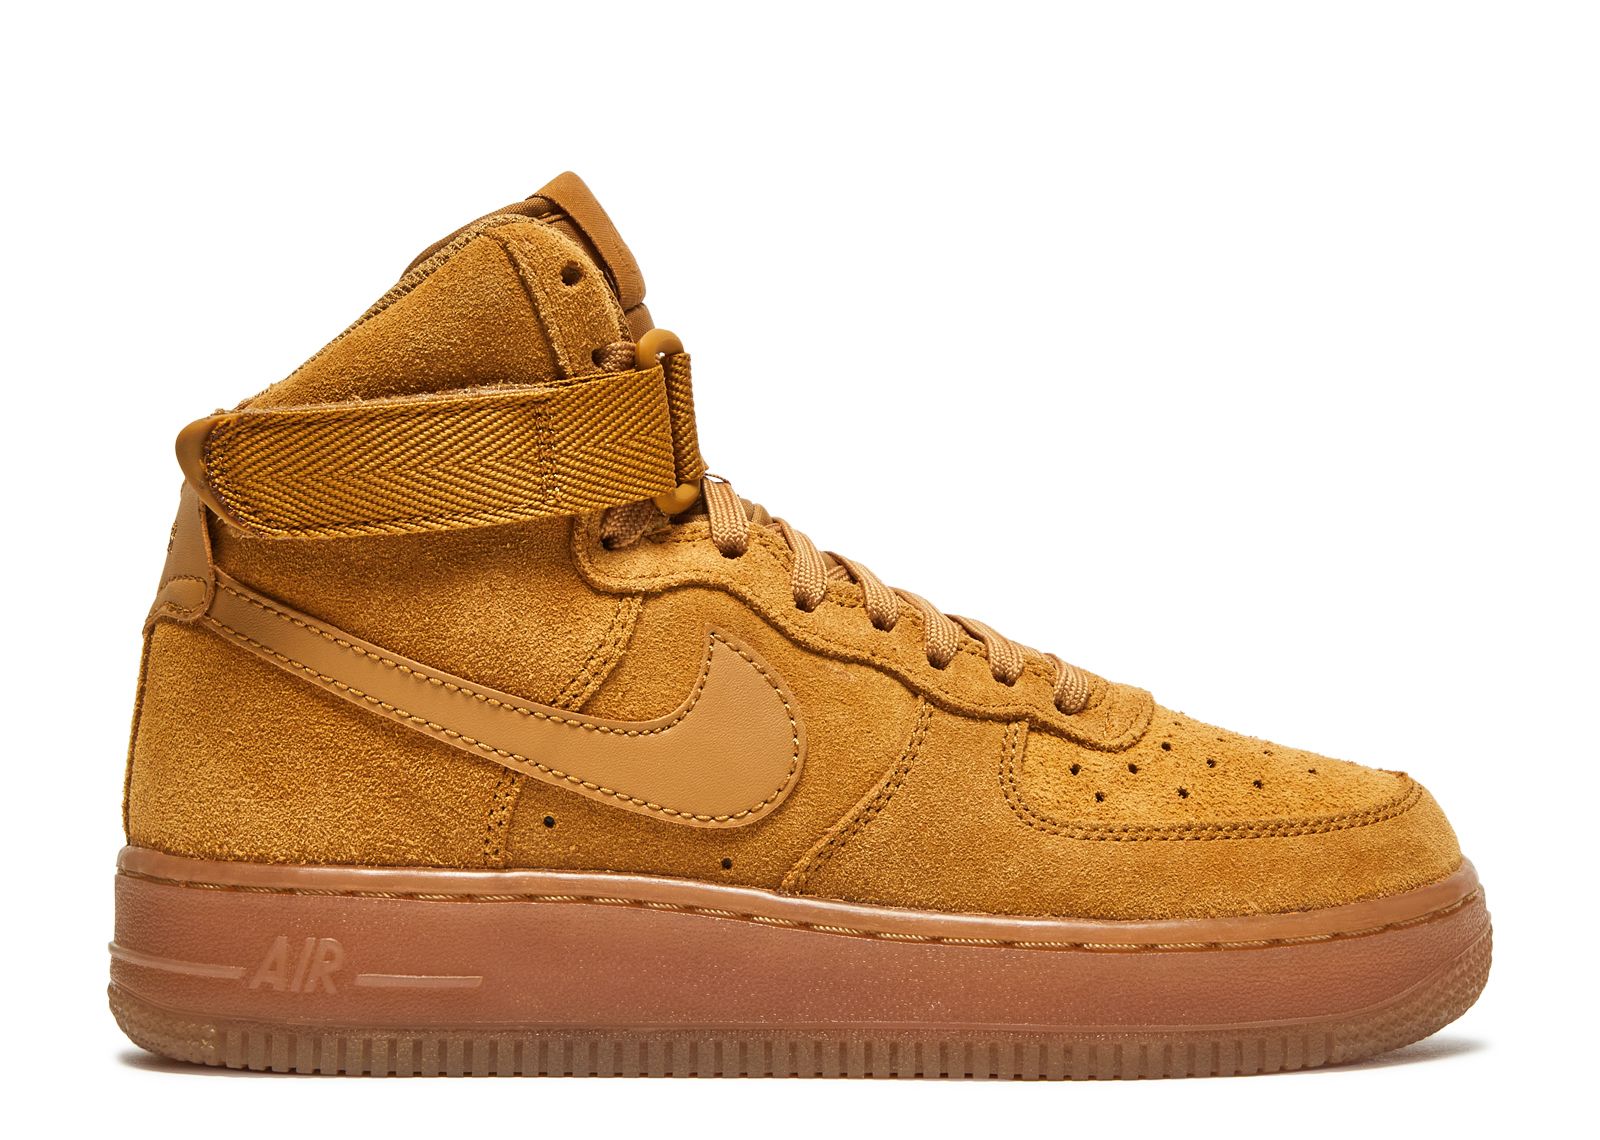 Nike Air Force 1 LV8 3 GS 'Wheat' Youth Sneakers - Size 5.5